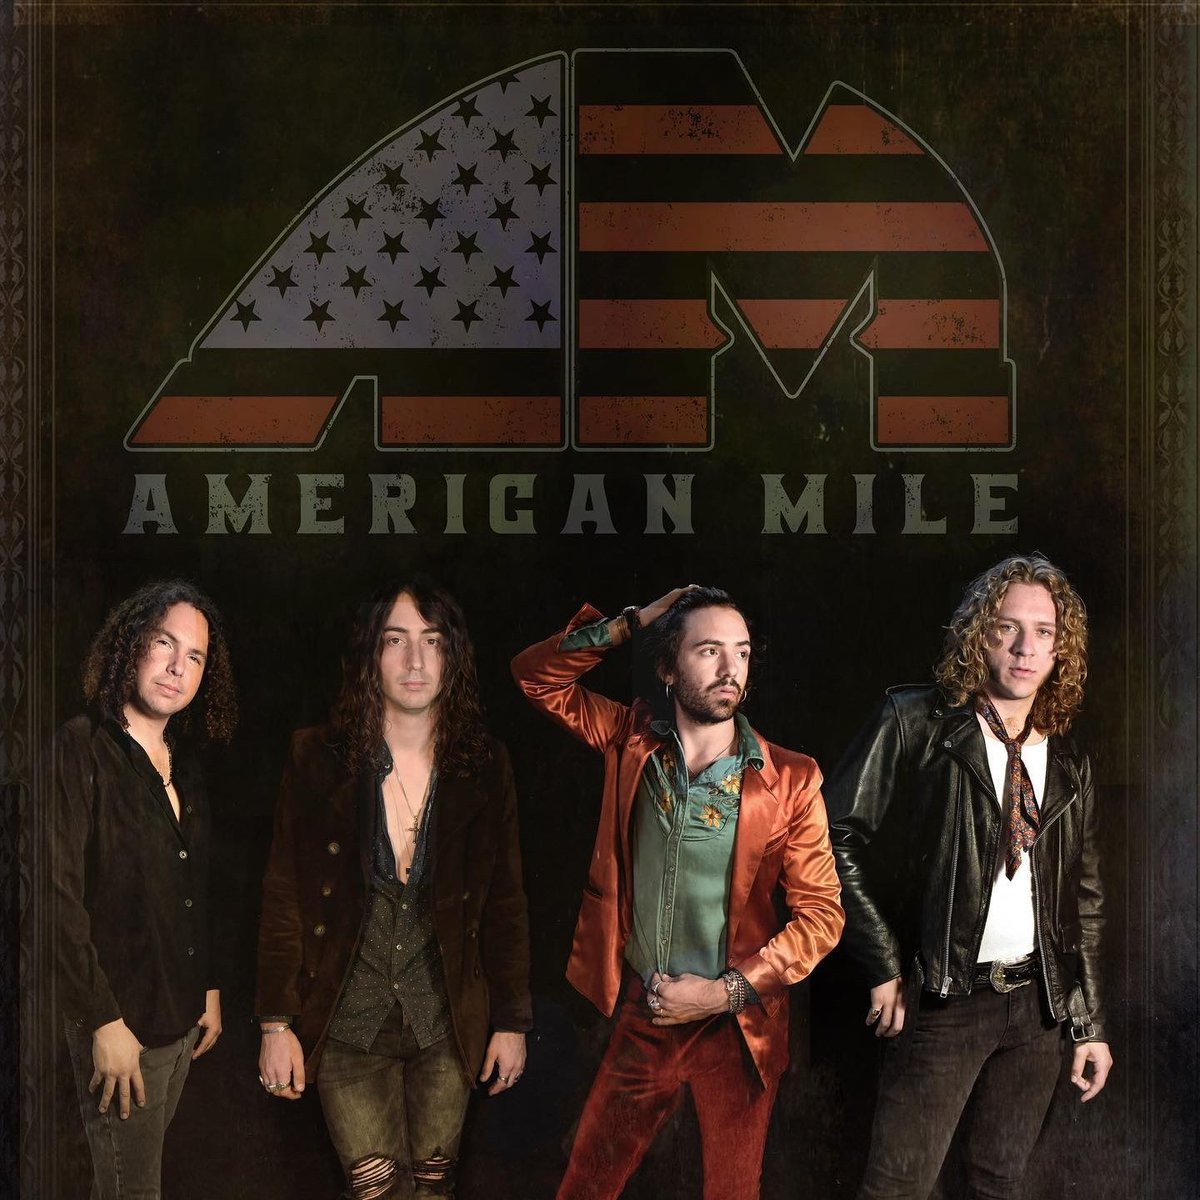 New Rock Covers: American Mile @theamericanmile cover Aerosmith's @Aerosmith Chip Away at the Stone #ChipAway #NewRockCovers #RichieSupa #Aerosmith #AmericanMile 🎧 youtu.be/RLn8tGimQ9Y